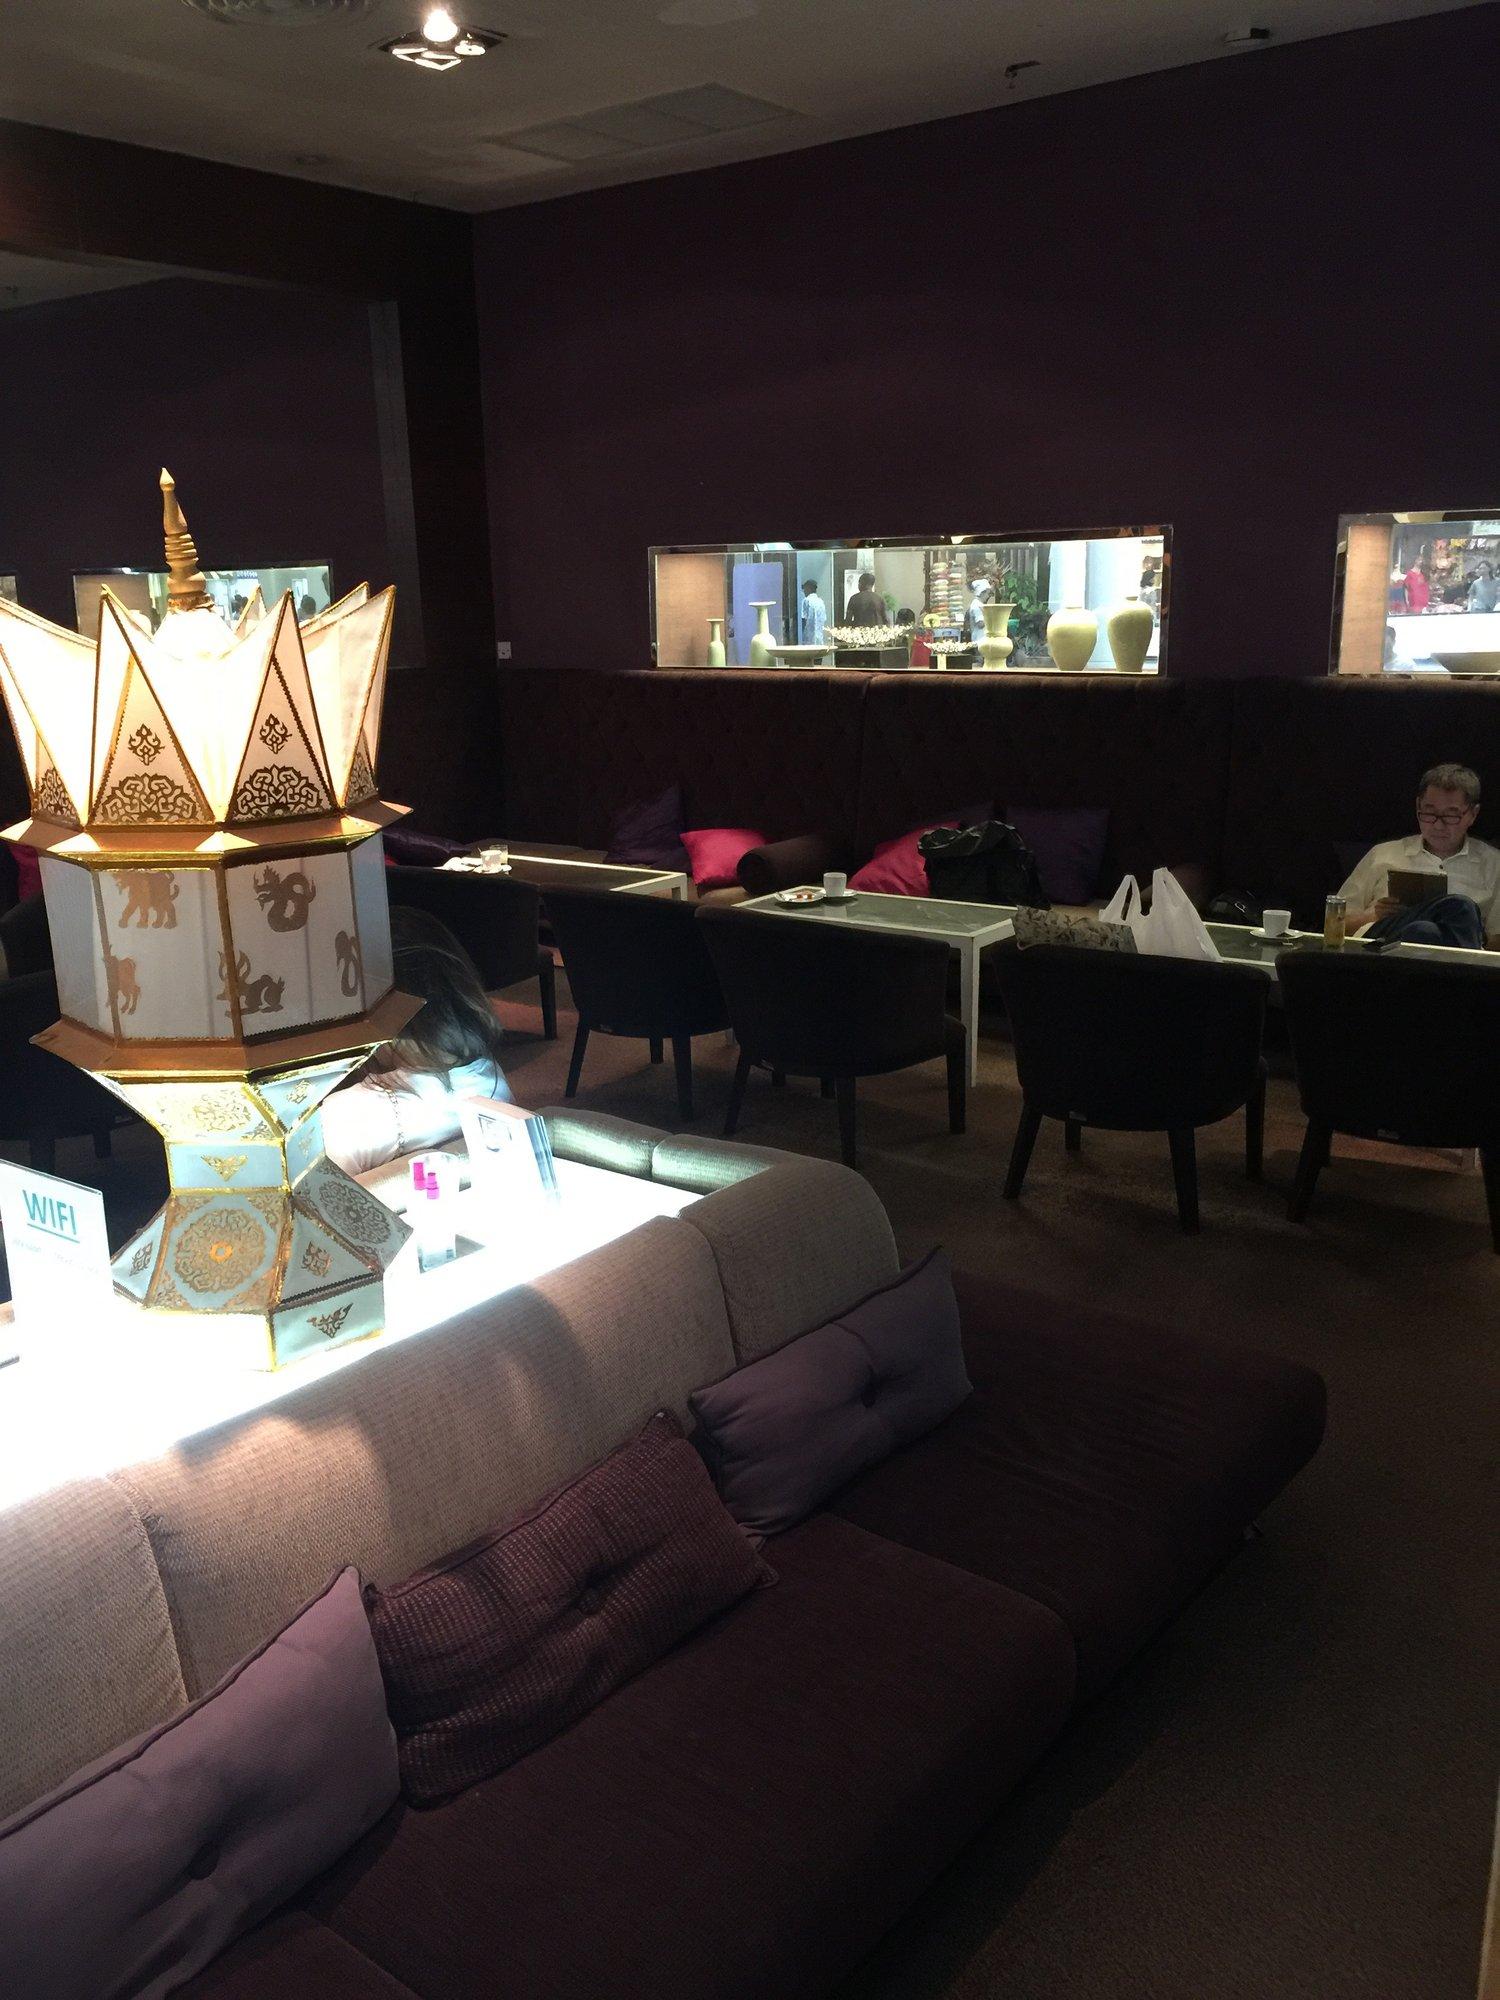 Thai Airways Royal Orchid Lounge image 10 of 22